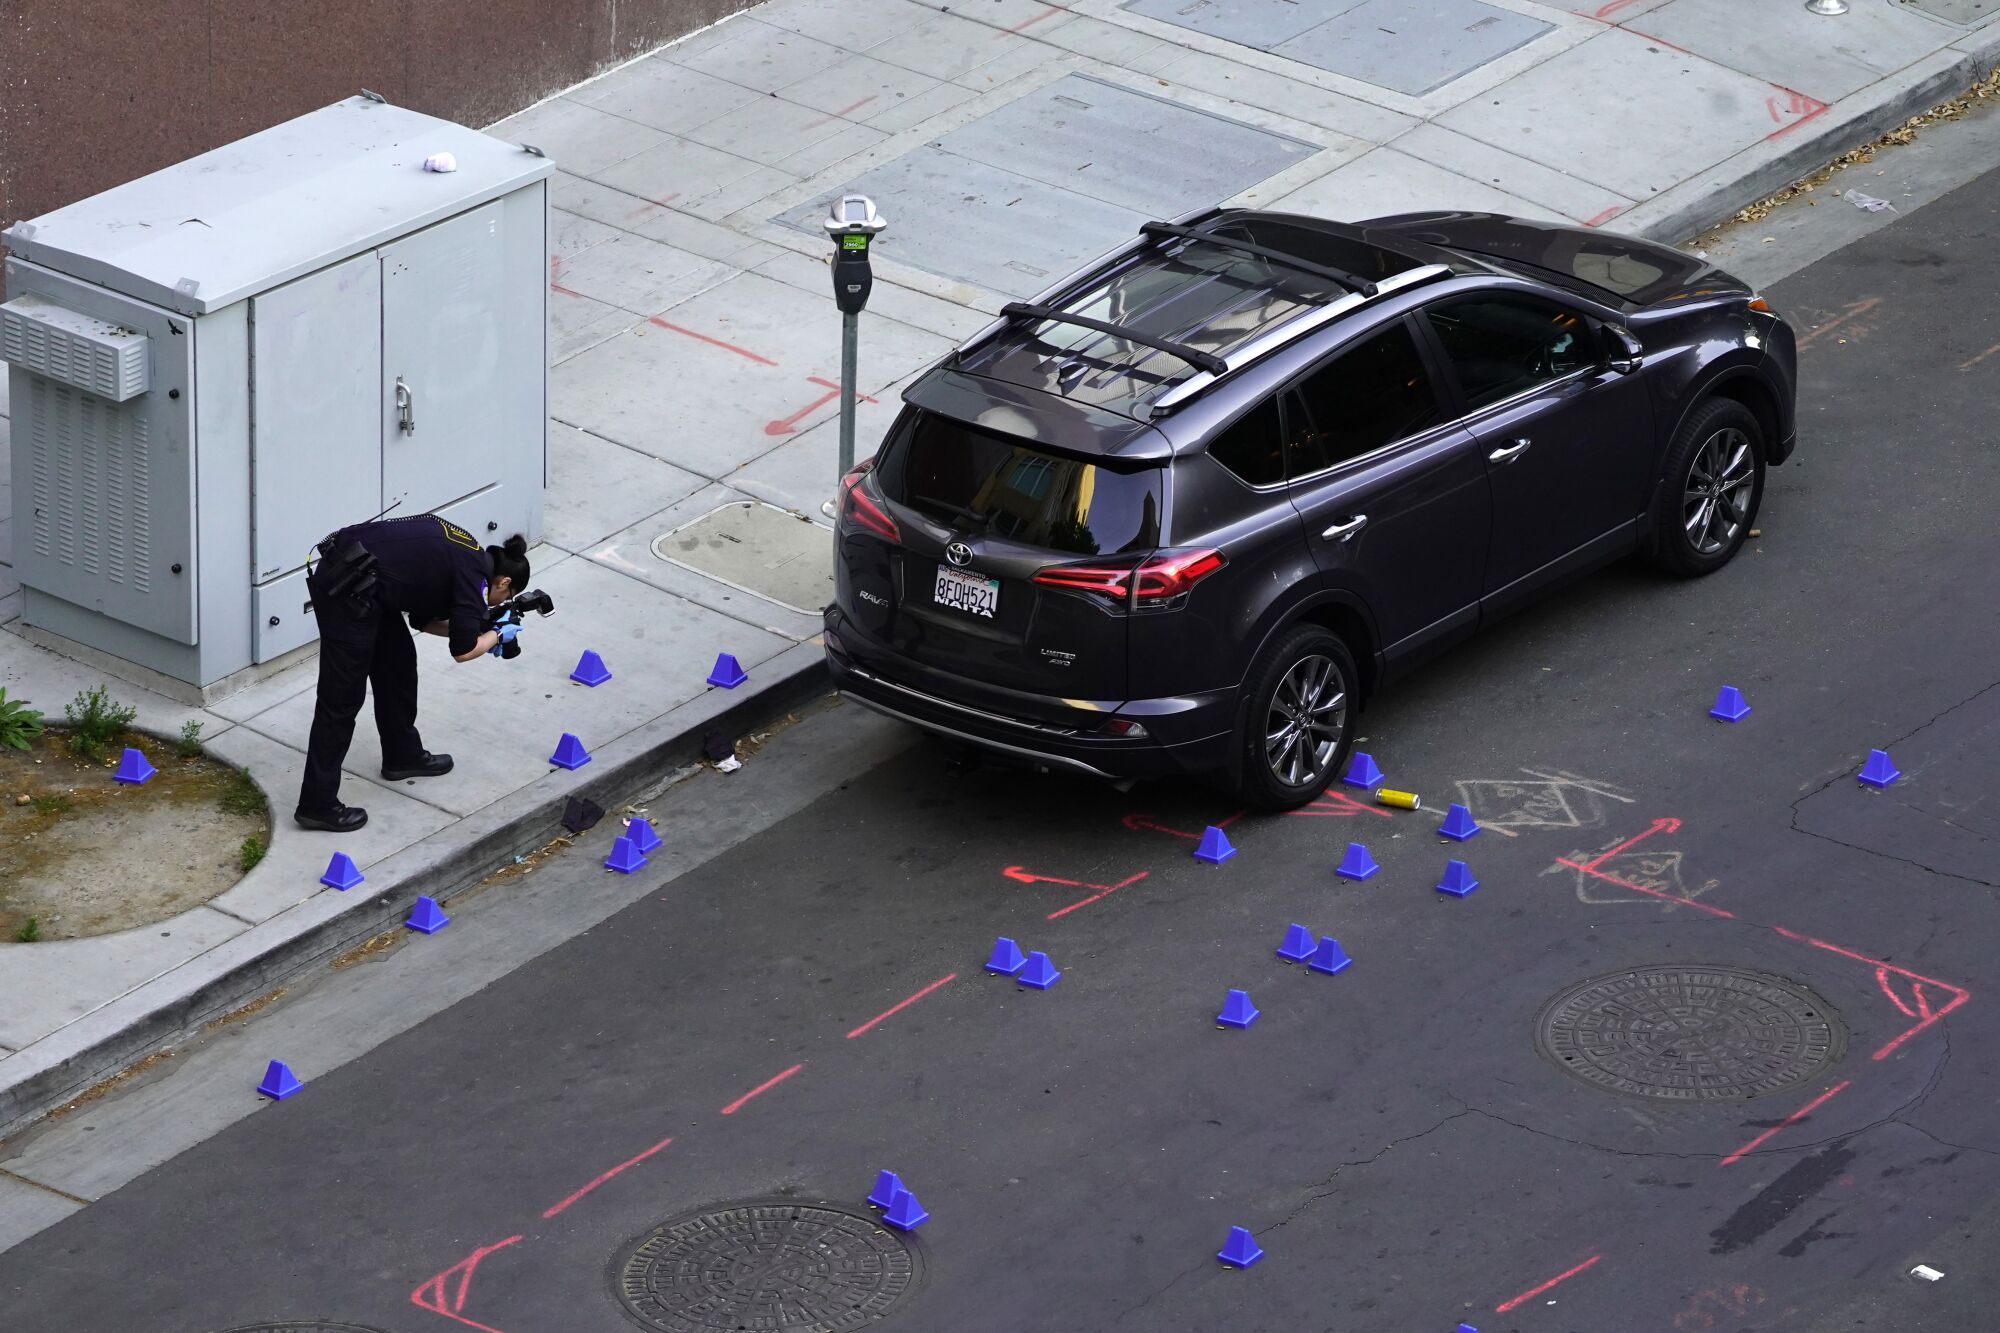 A person bends over to take photos of evidence markers scattered around a street and sidewalk